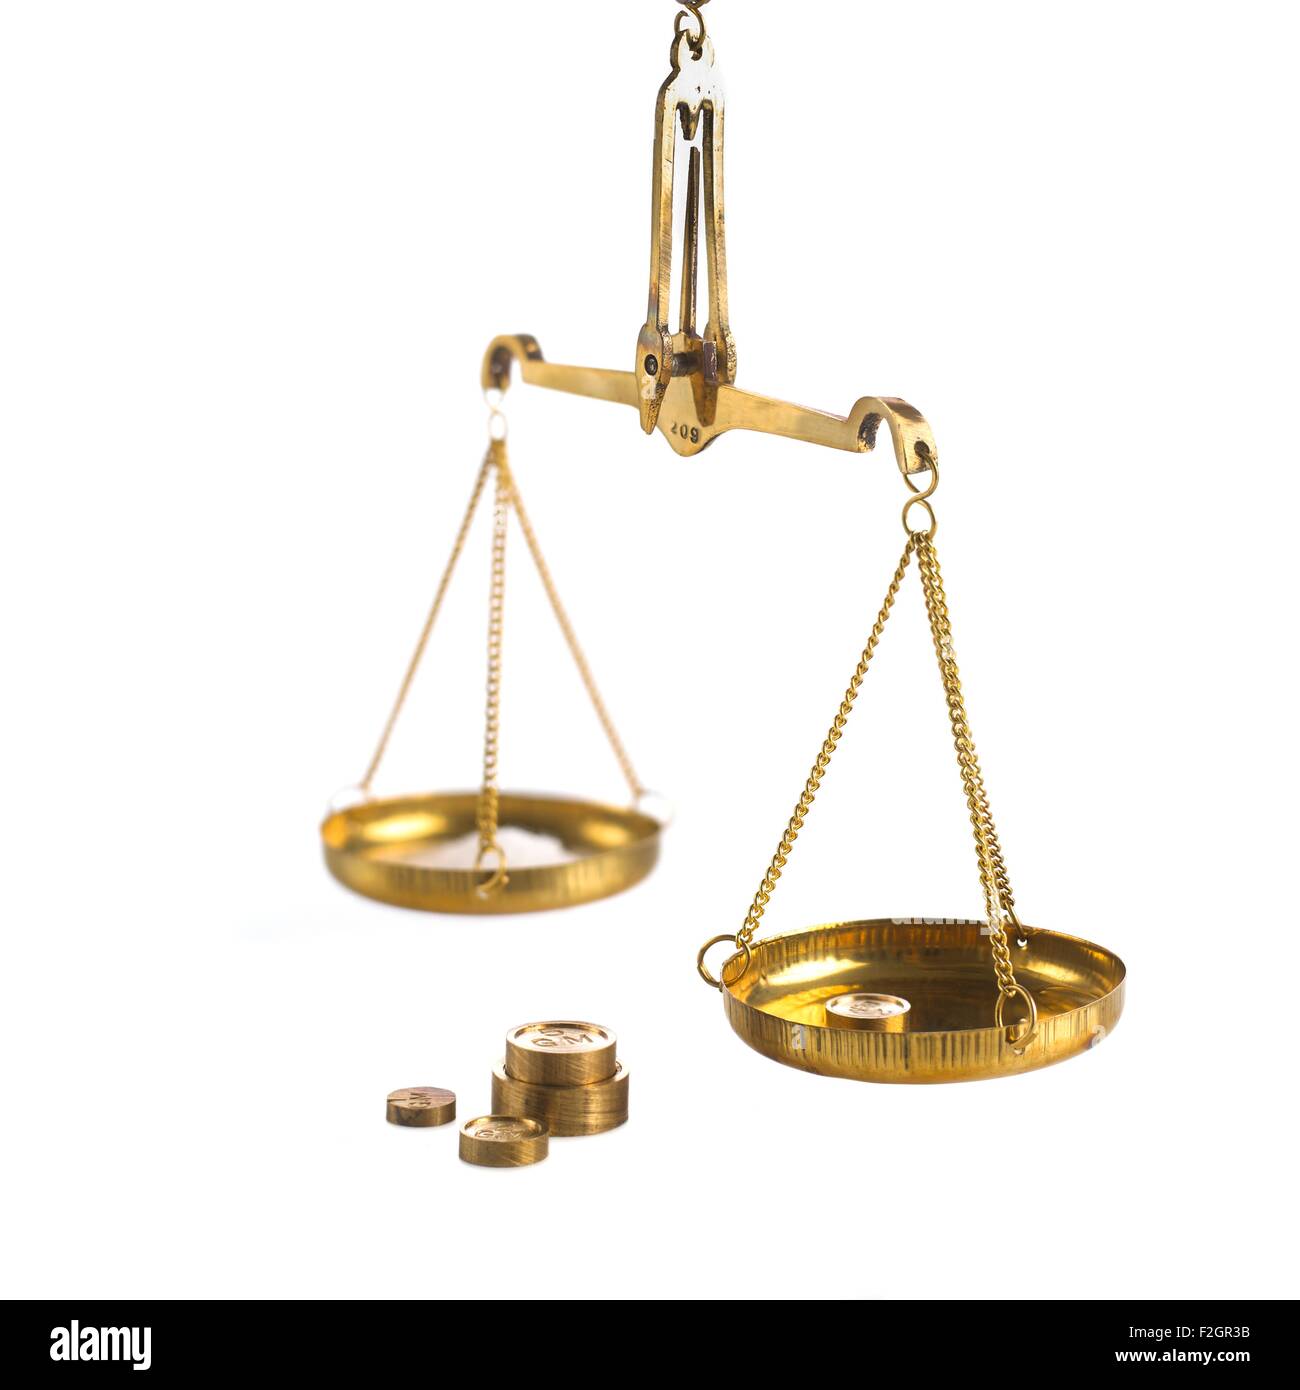 https://c8.alamy.com/comp/F2GR3B/weighing-scales-with-weights-F2GR3B.jpg